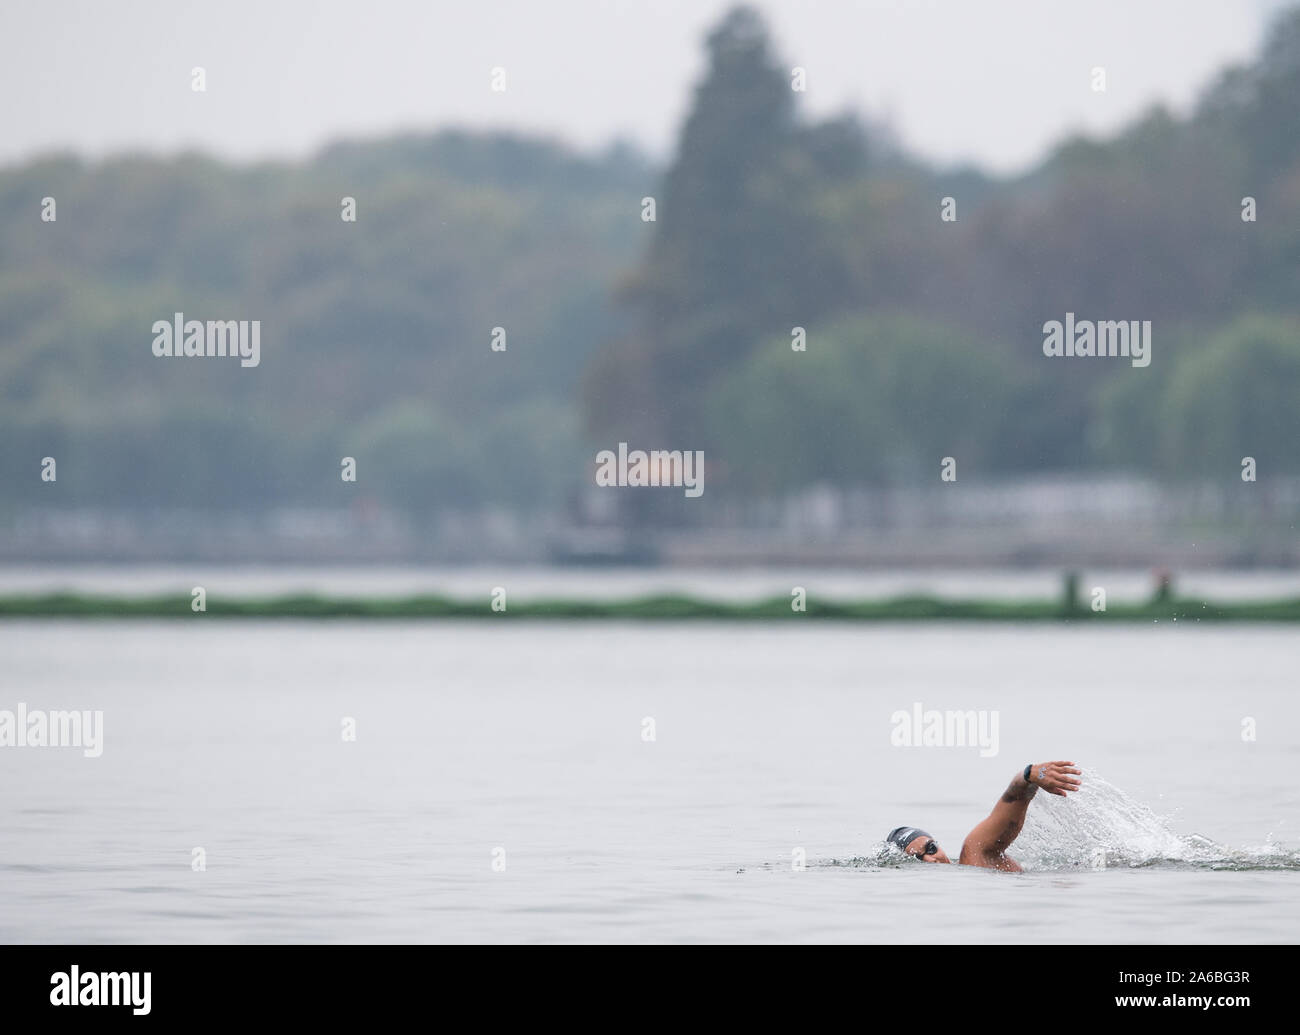 Wuhan, China. 25th Oct, 2019. Ana Marcela of Brazil competes during the women's 5km of open water at the 7th CISM Military World Games in Wuhan, capital of central China, Oct. 25, 2019. Credit: Xiao Yijiu/Xinhua/Alamy Live News Stock Photo